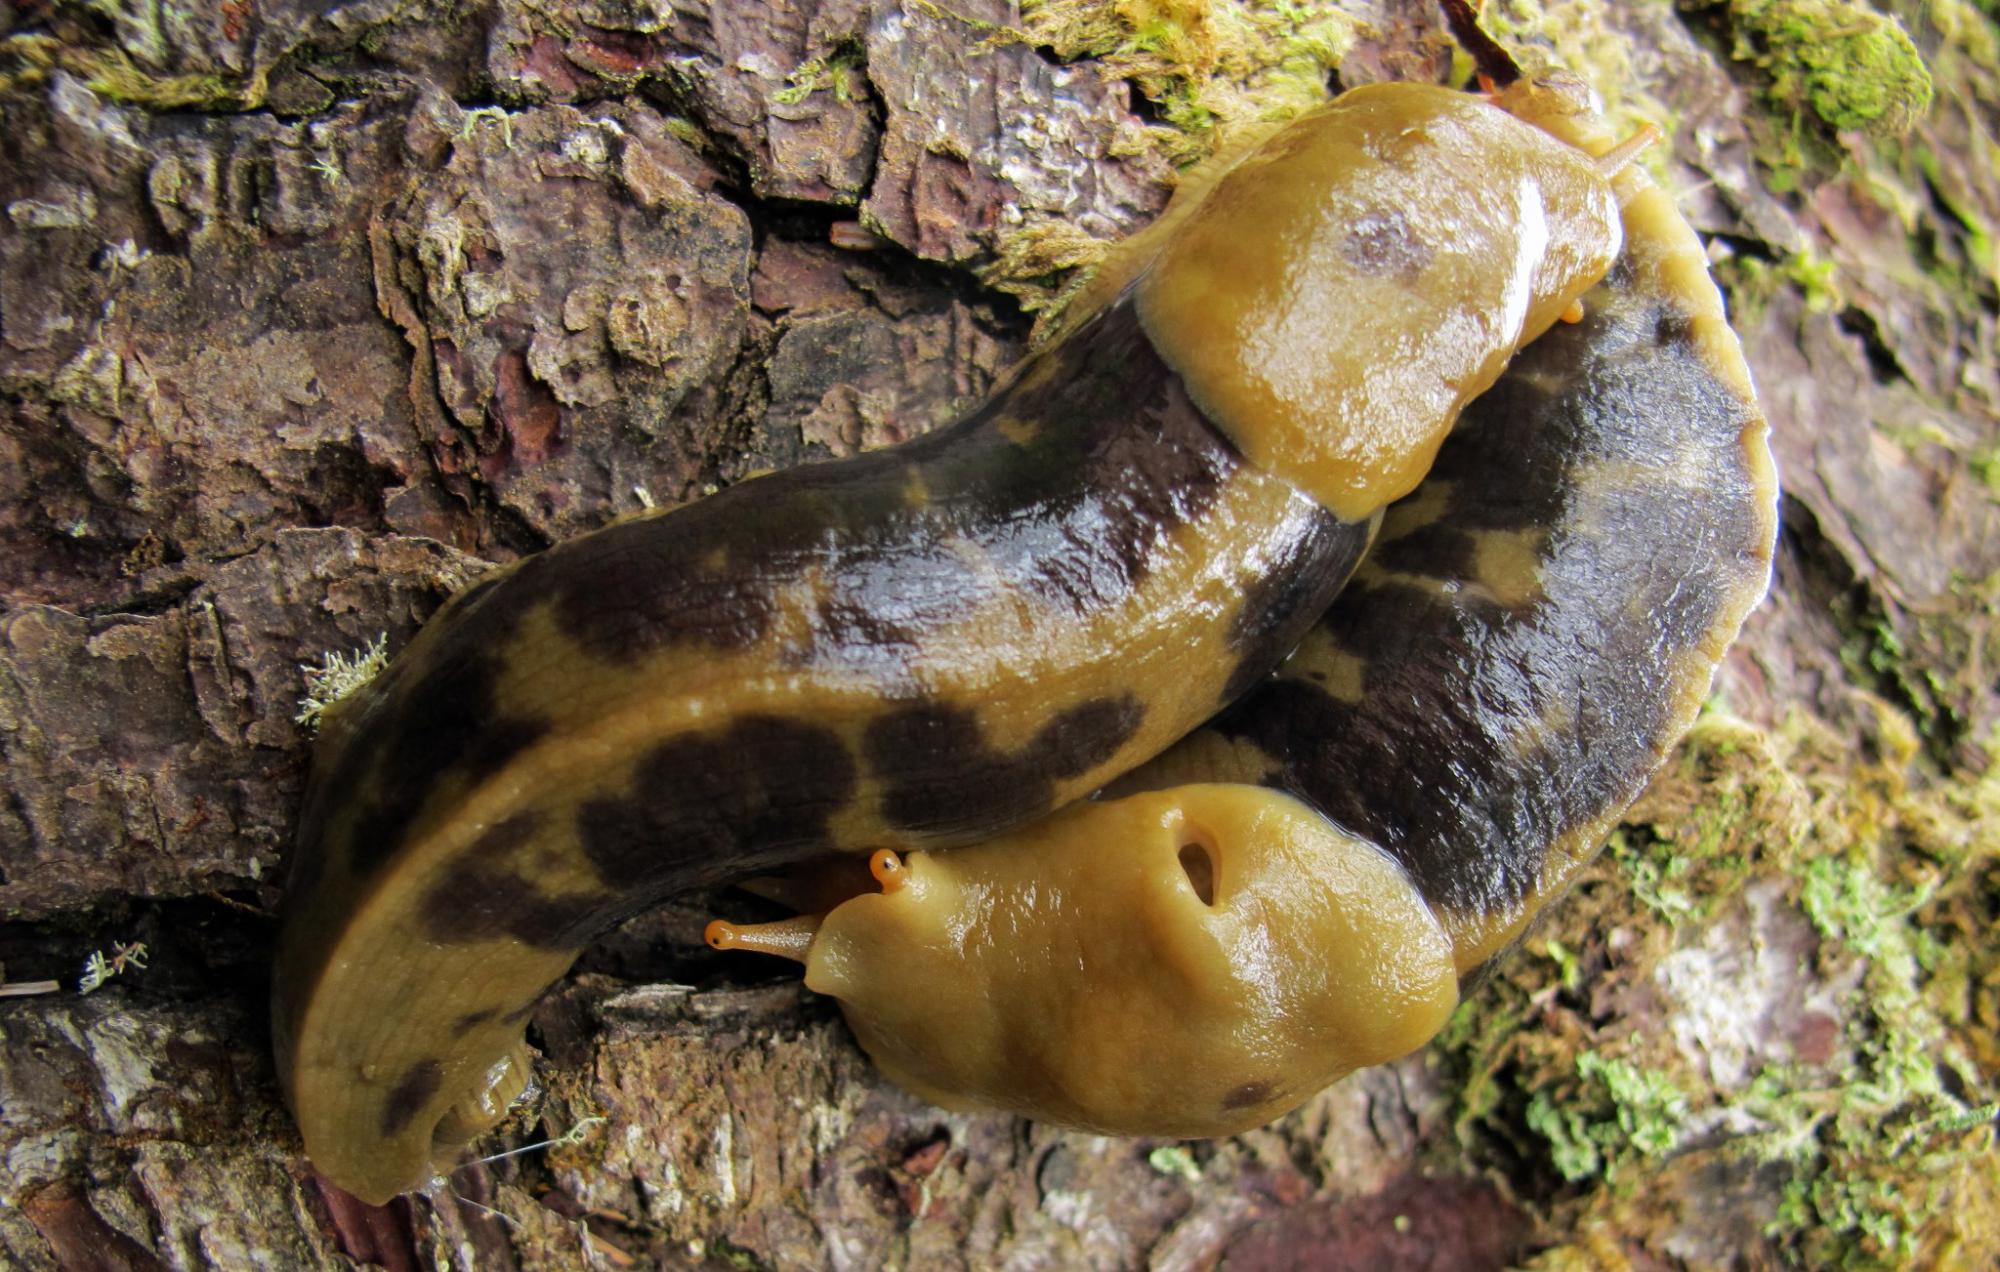 Banana slugs about to get frisky. Google apophallation to learn more, but.. brace yourself.